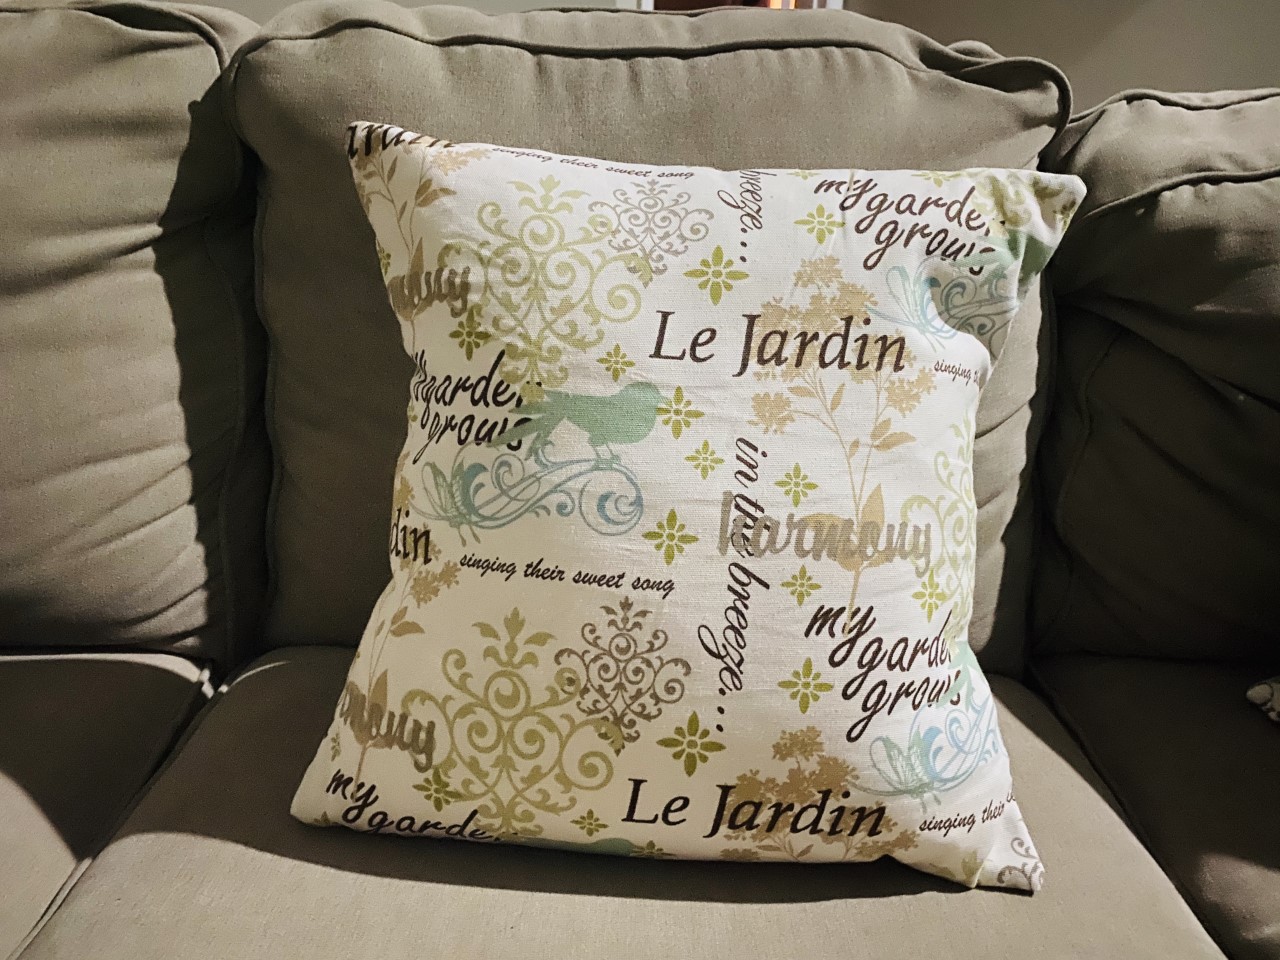 16 Home Decor Pillow kit PILLOW INSERT NOT INCLUDED MUST BE PURCHASED  SEPARATELY - My Garden - Le Jardin with bird and scroll designs, colors in  earth tones of light teal, tan